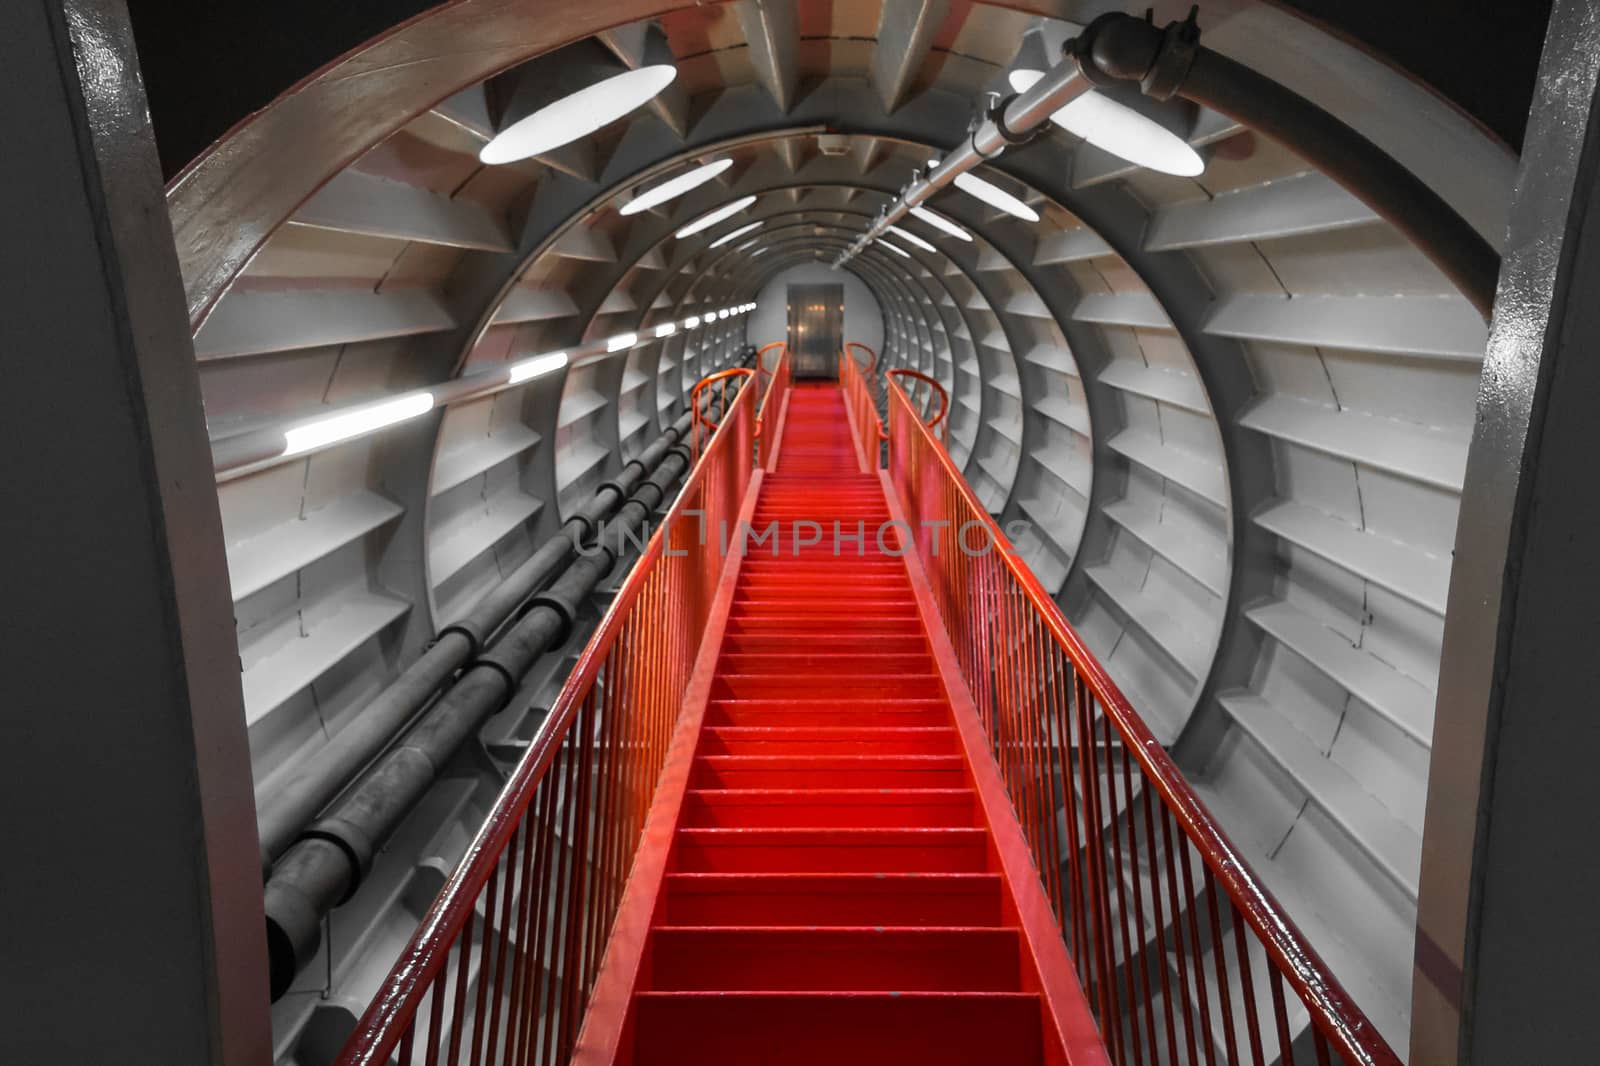 Staircase inside a tube of the Atomium in Brussels Belgium